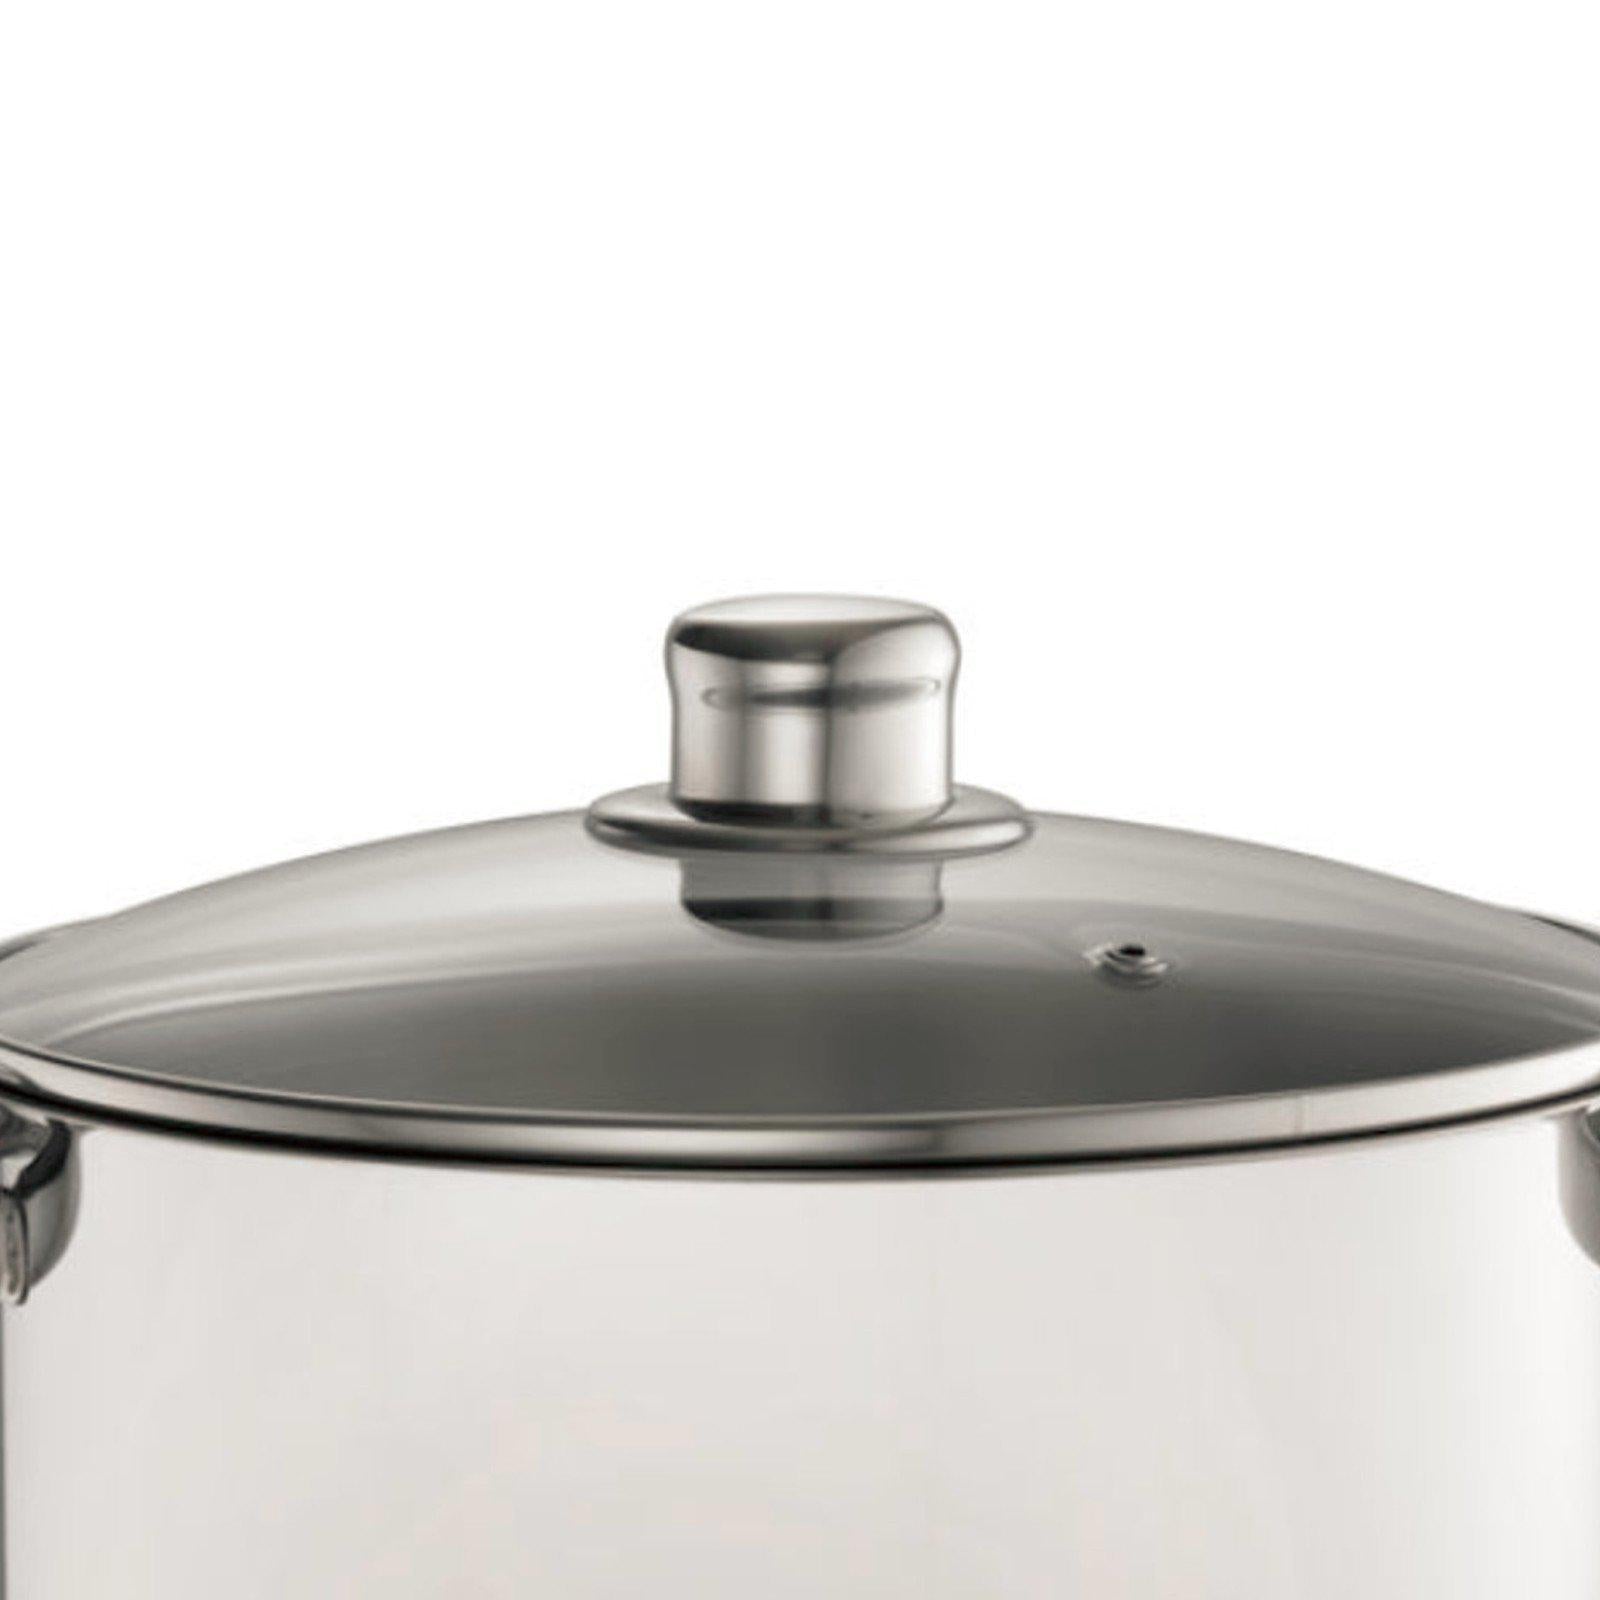 Davis & Waddell 16.5 Litre Stock Pot With Glass Lid-stock pot-Chef's Quality Cookware